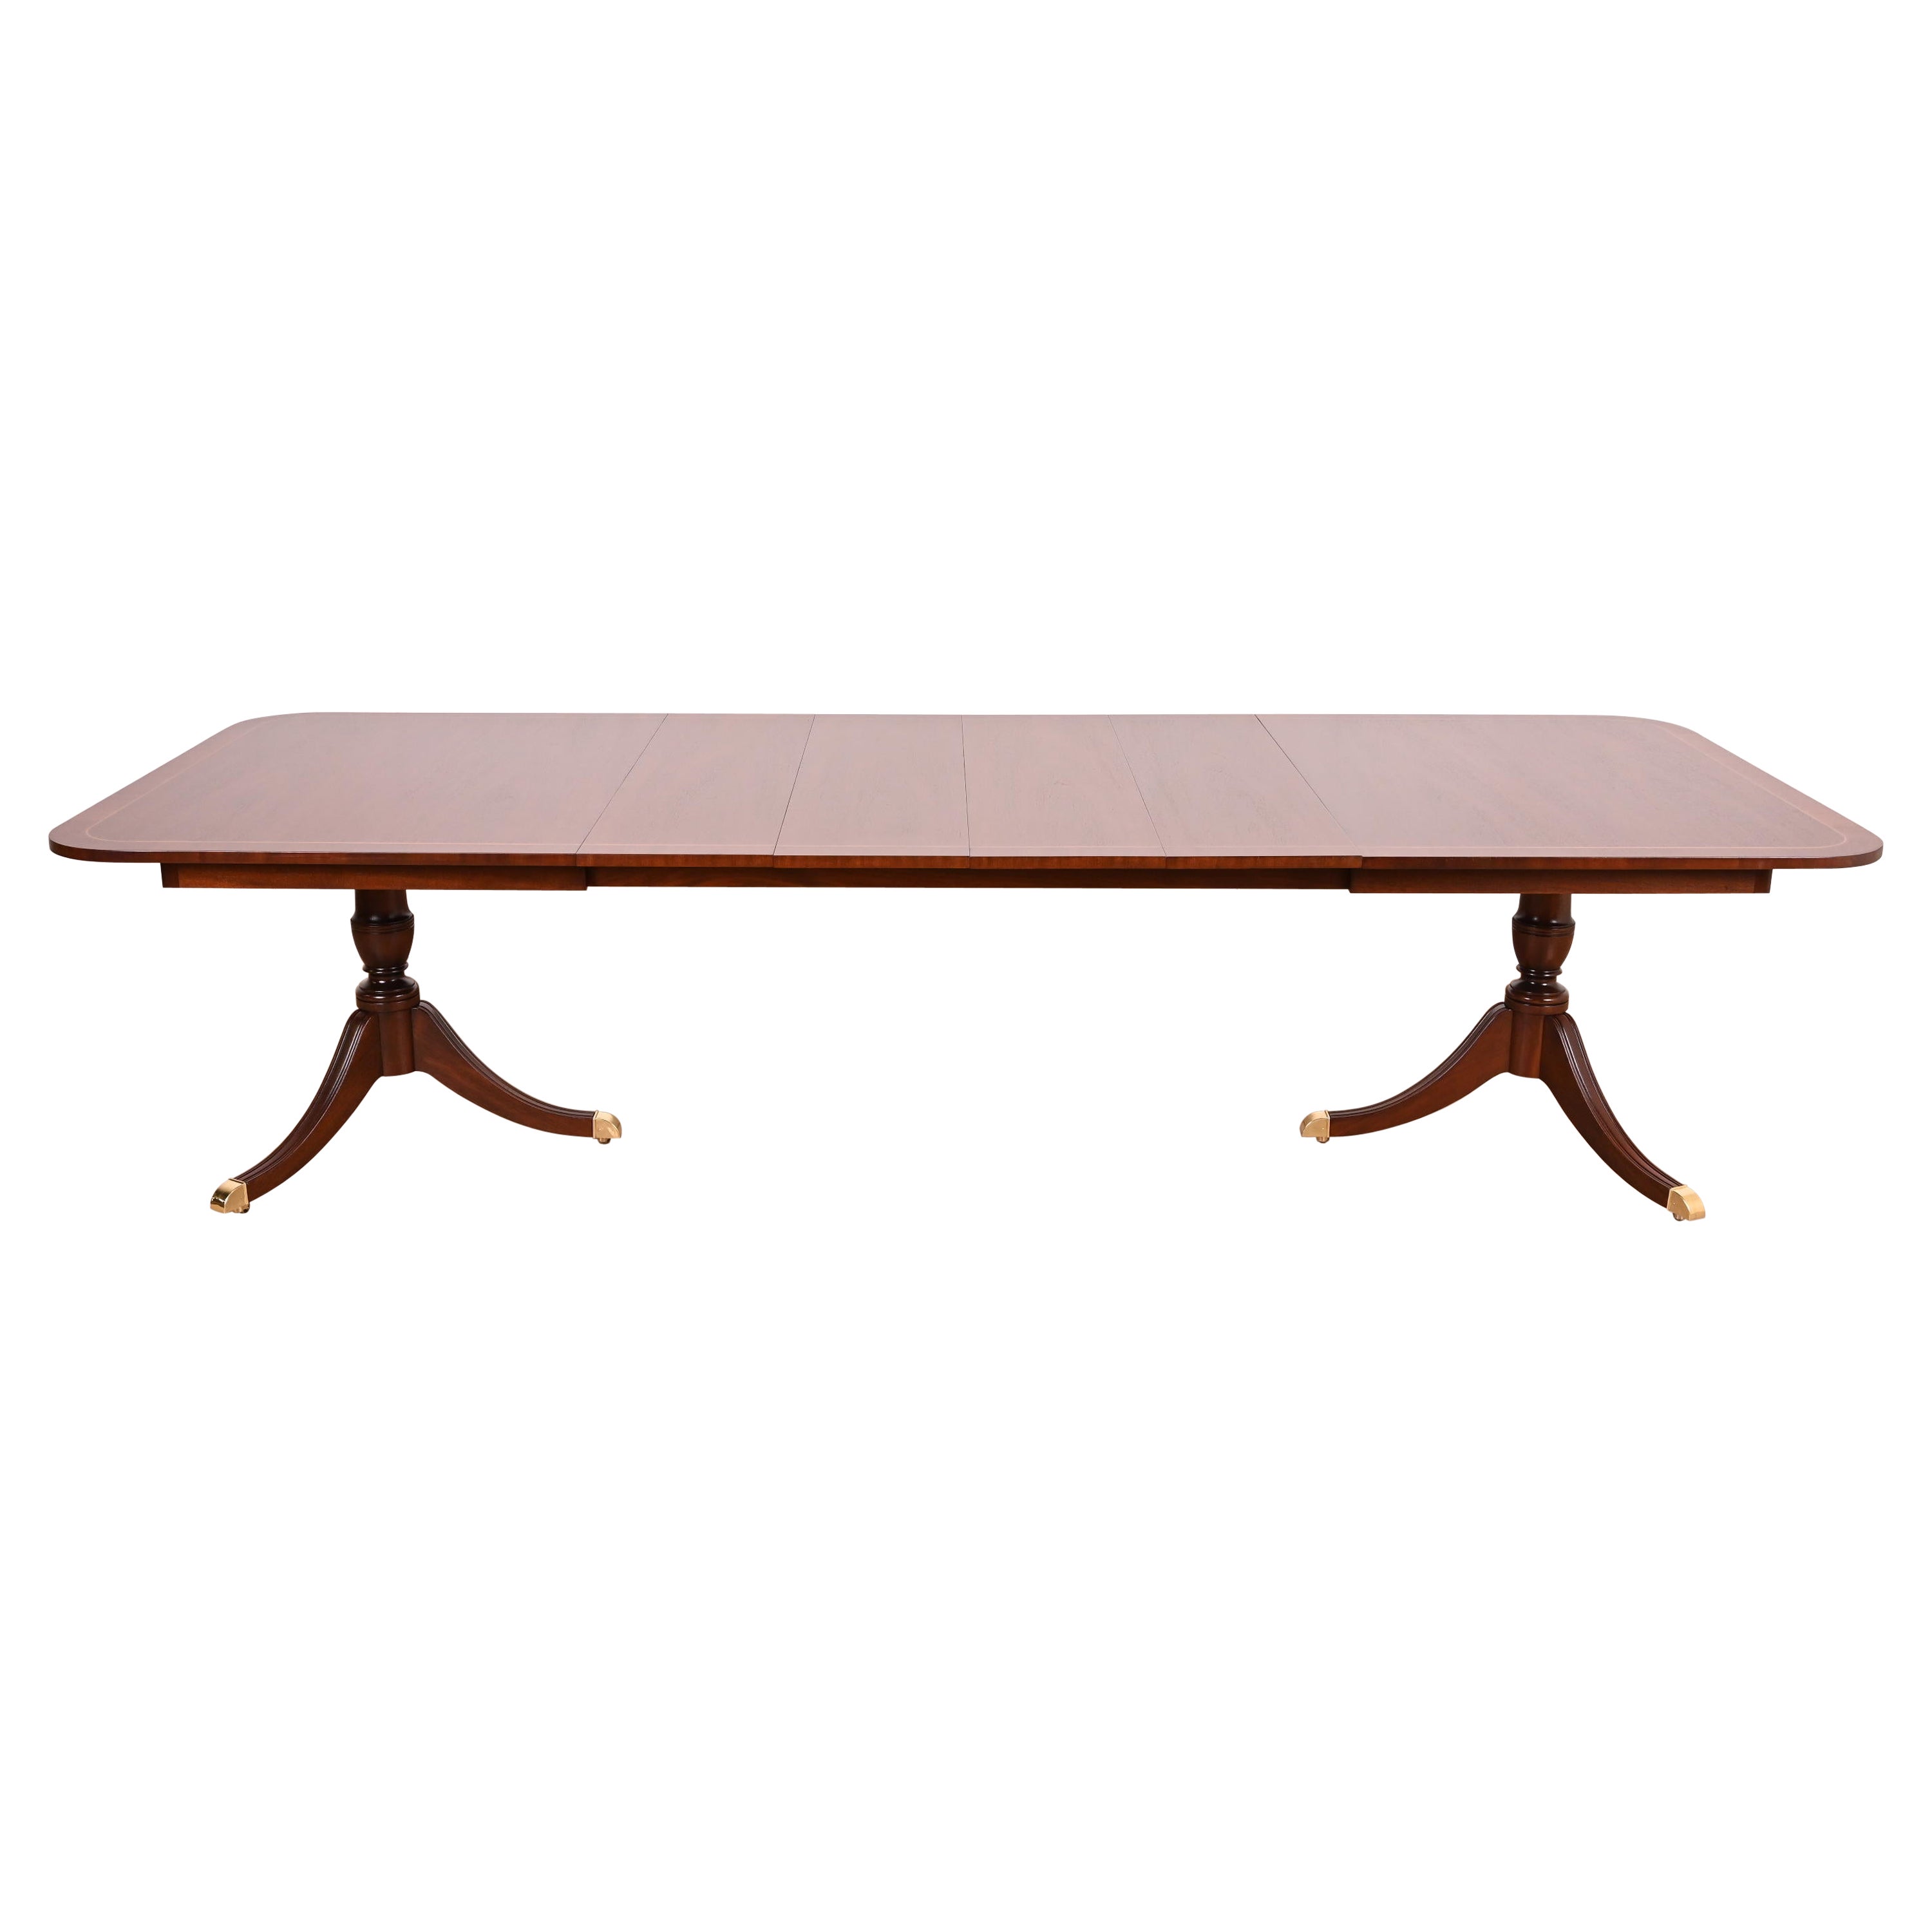 Kindel Furniture Georgian Mahogany Double Pedestal Dining Table, Refinished For Sale